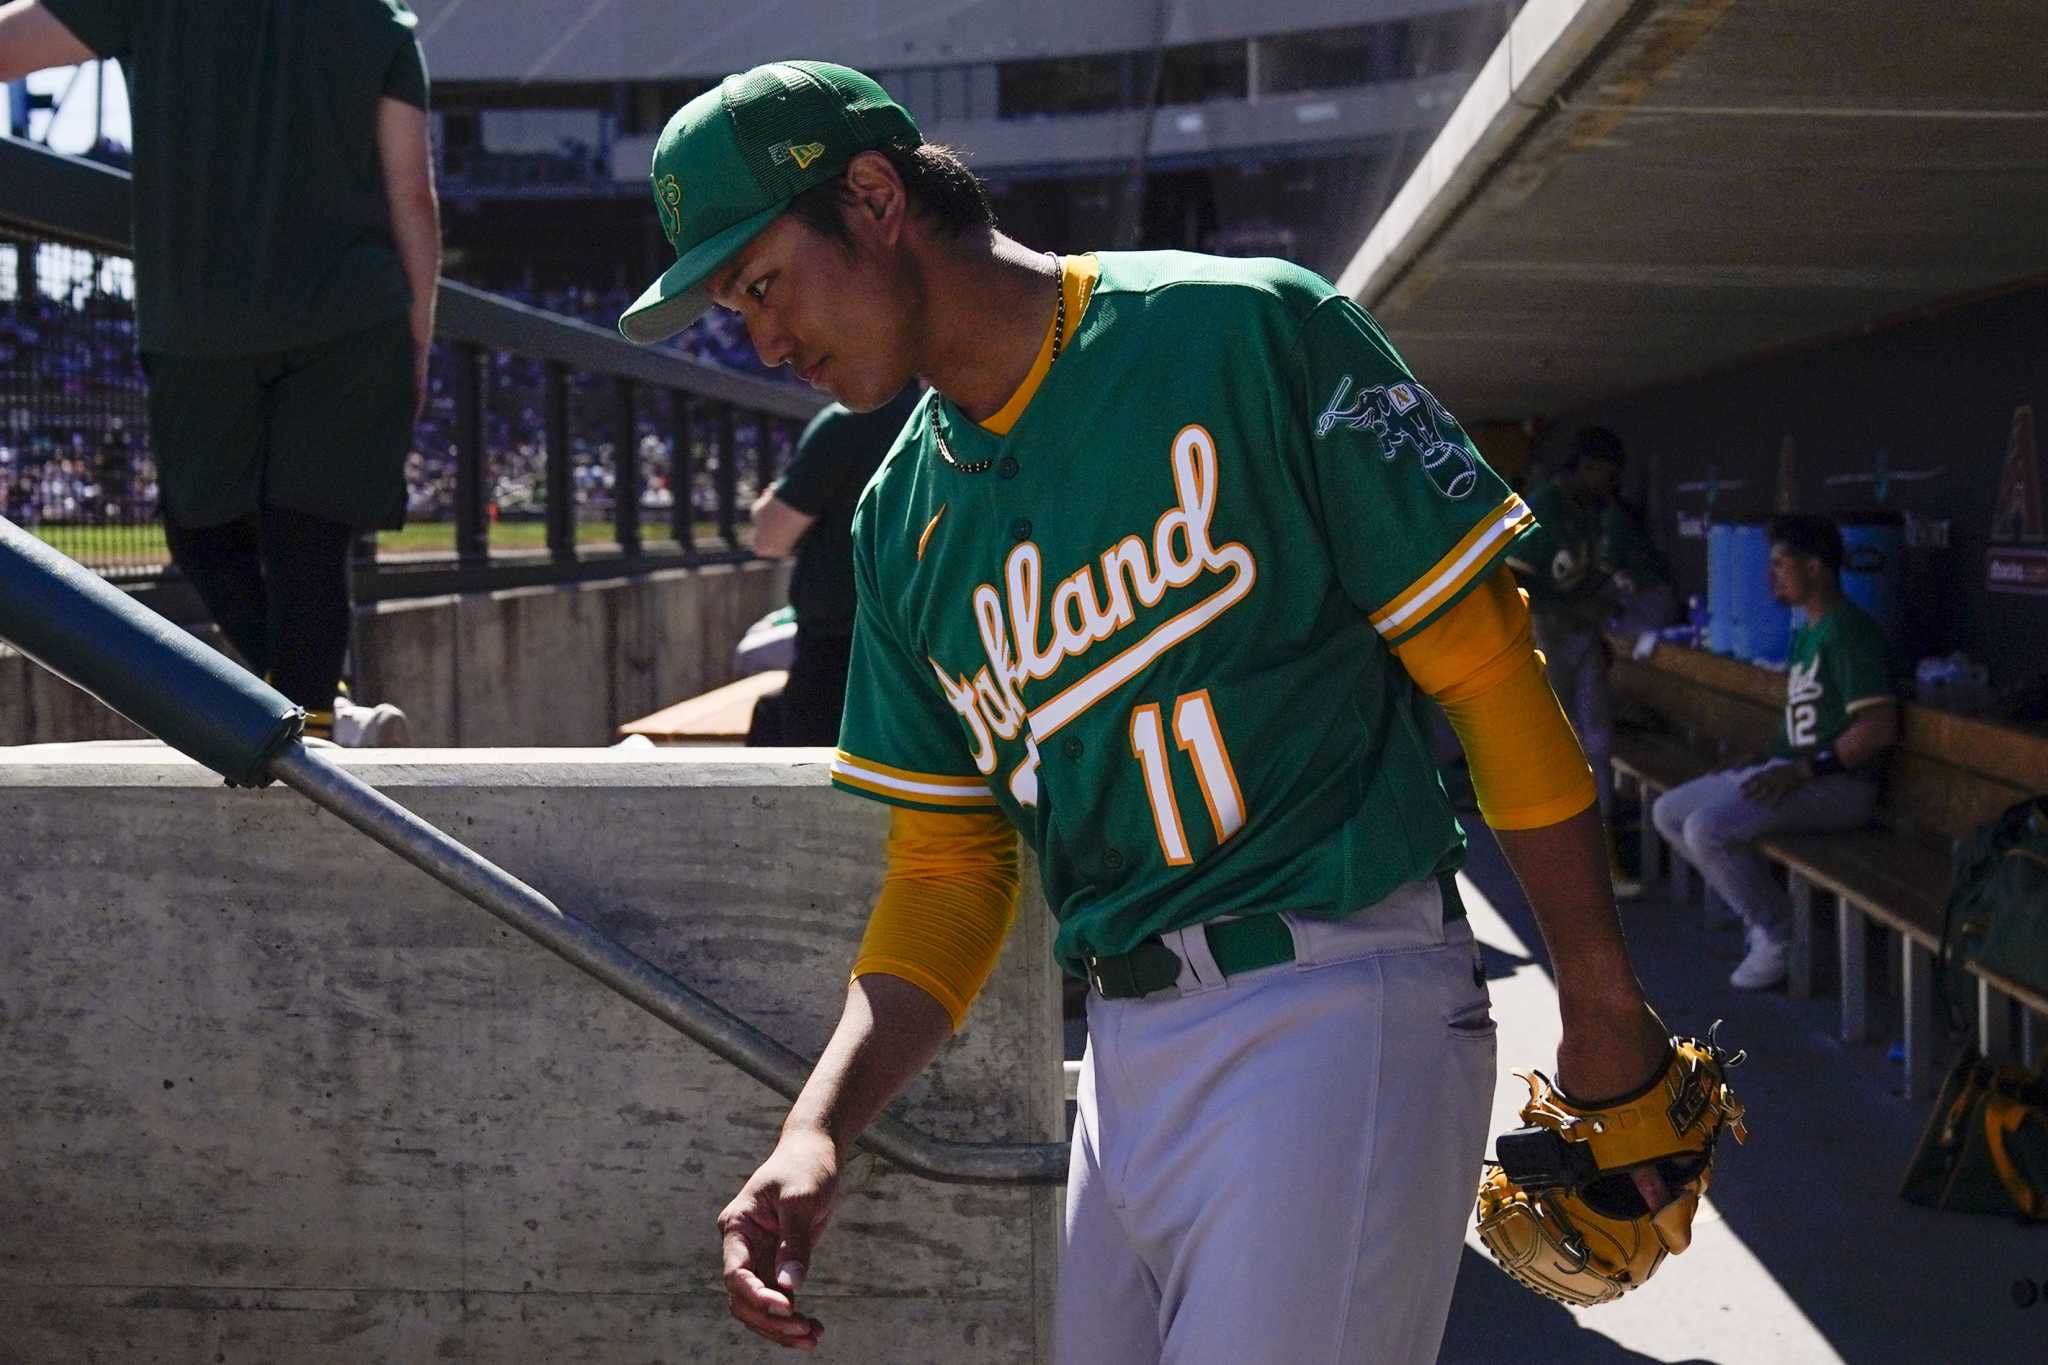 Shintaro Fujinami signs one-year contract with Oakland A's - Sactown Sports